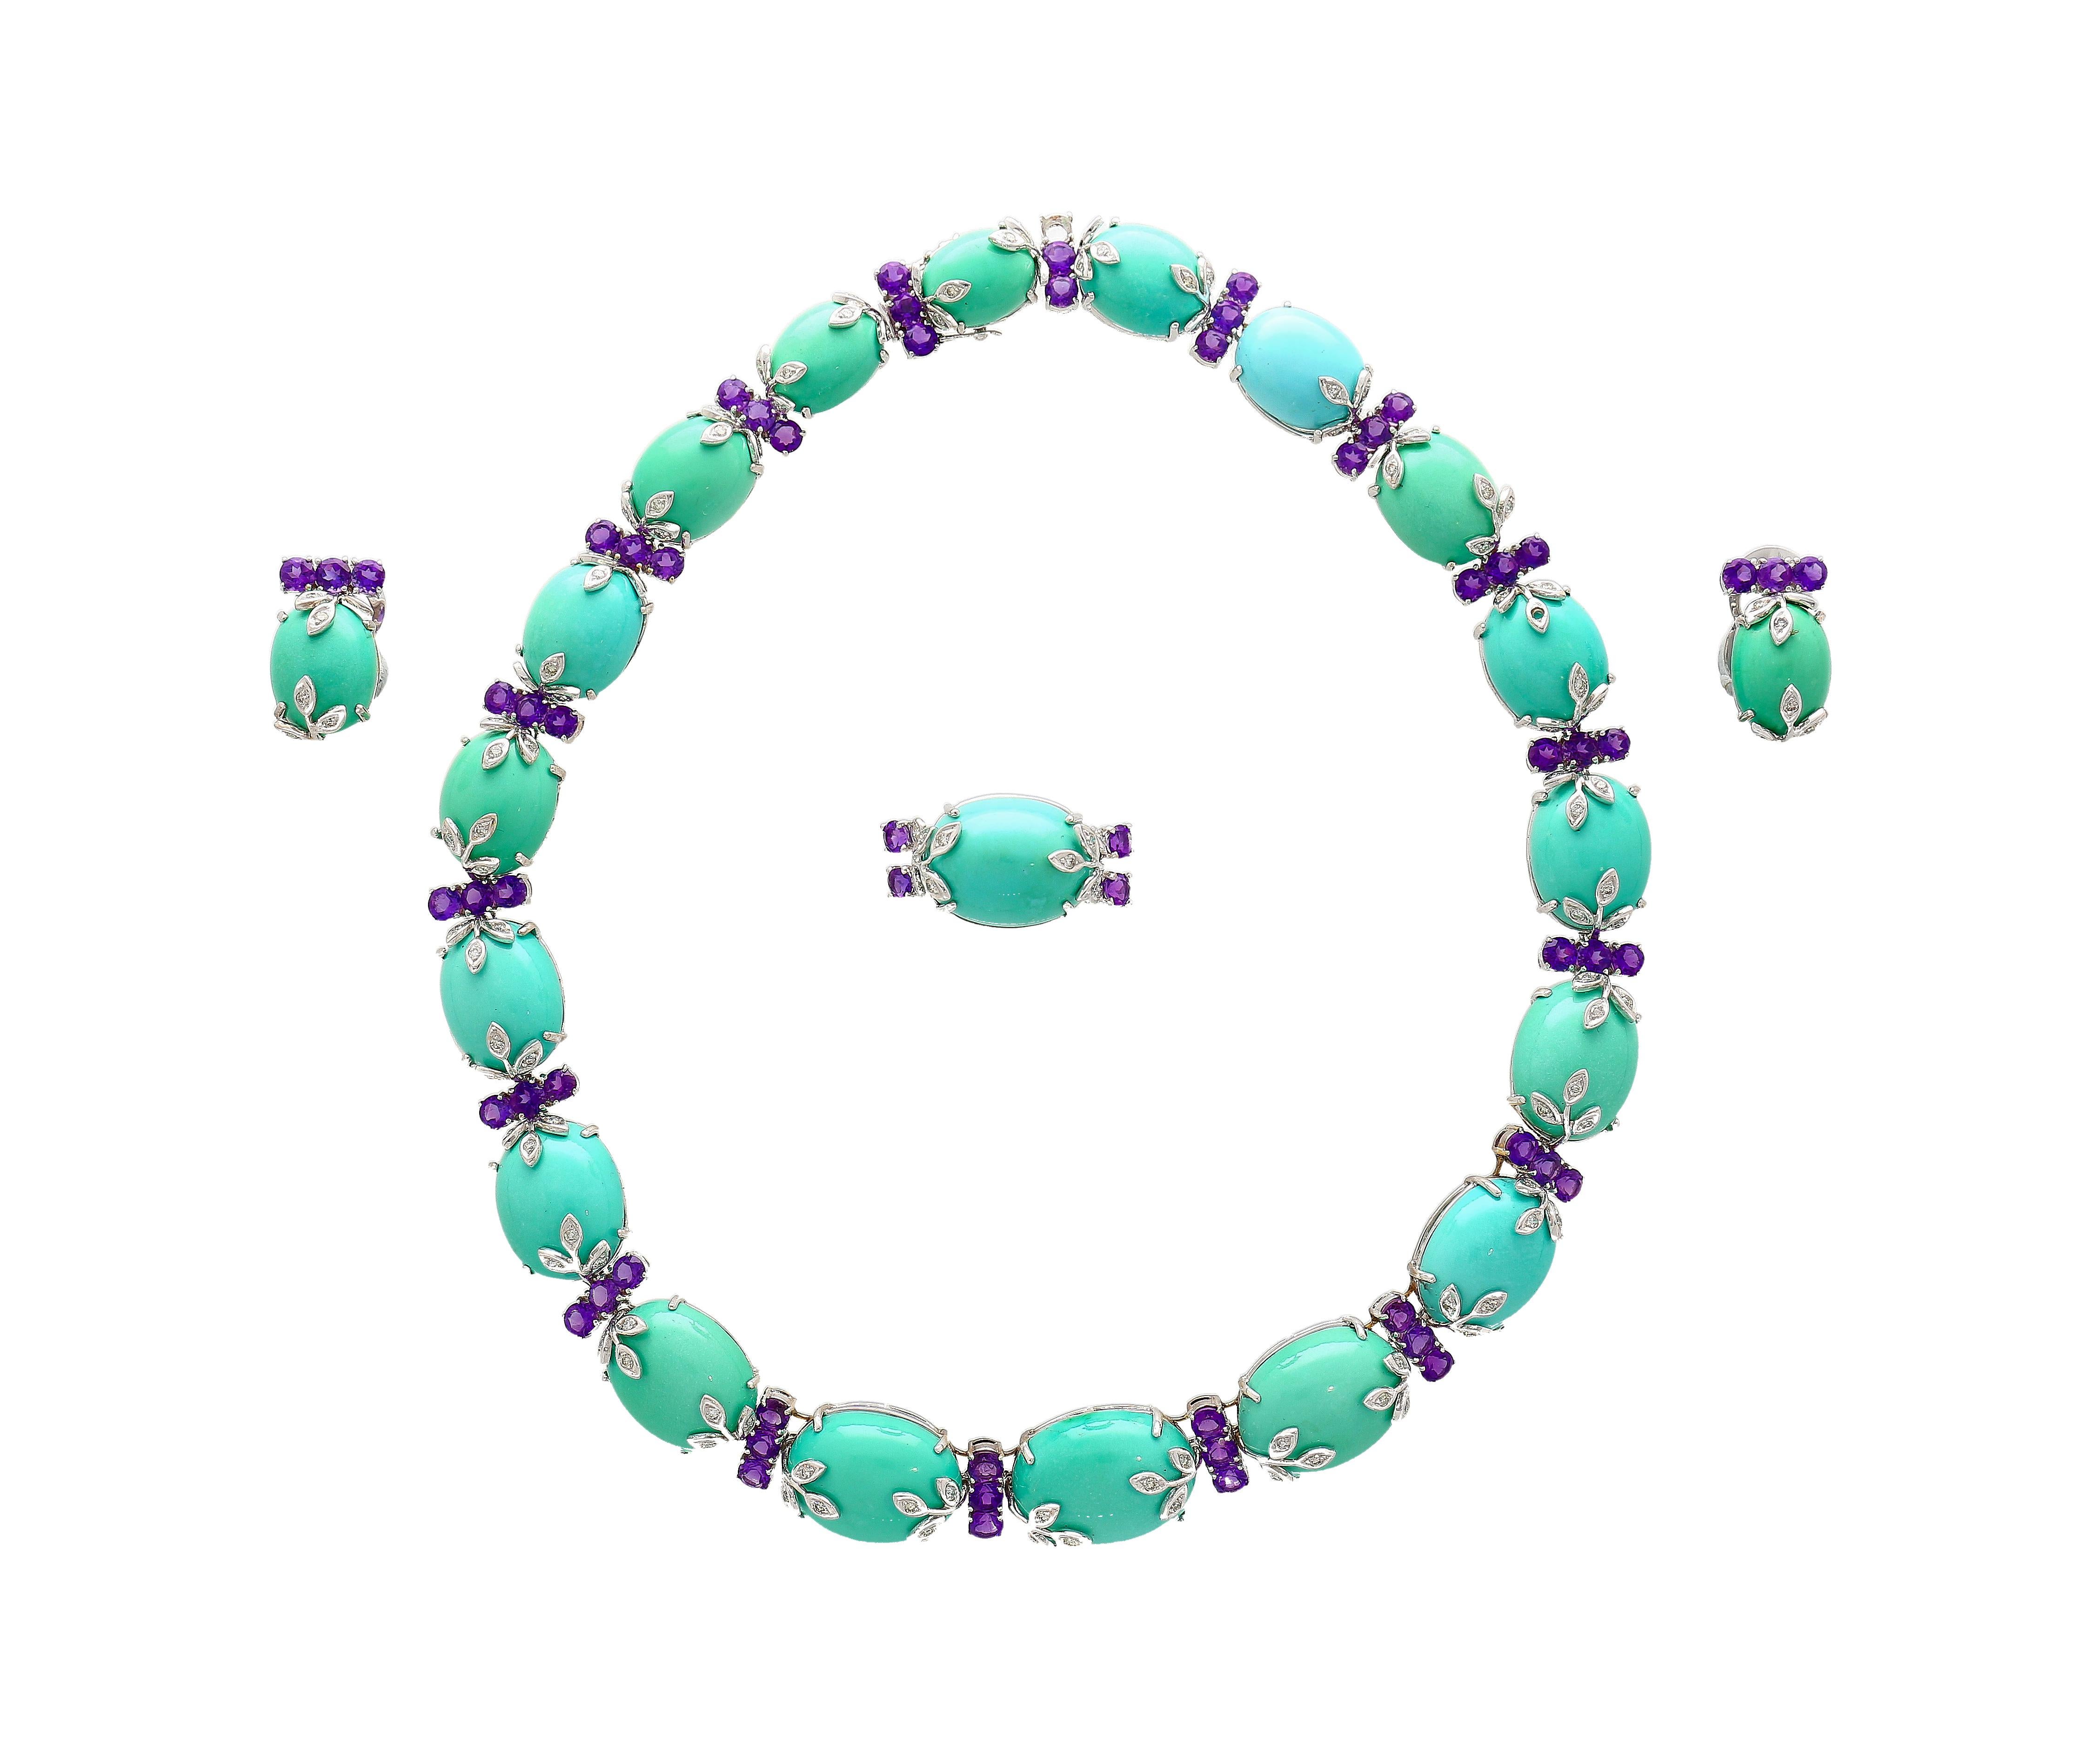 18K white gold choker necklace, weighing 63.73 grams and measuring 15 inches in length with a box closure. The necklace features a floral oriental motif adorned with 20 Turquoise center stones, of 263.90 carats. Cabochon cut with measurements